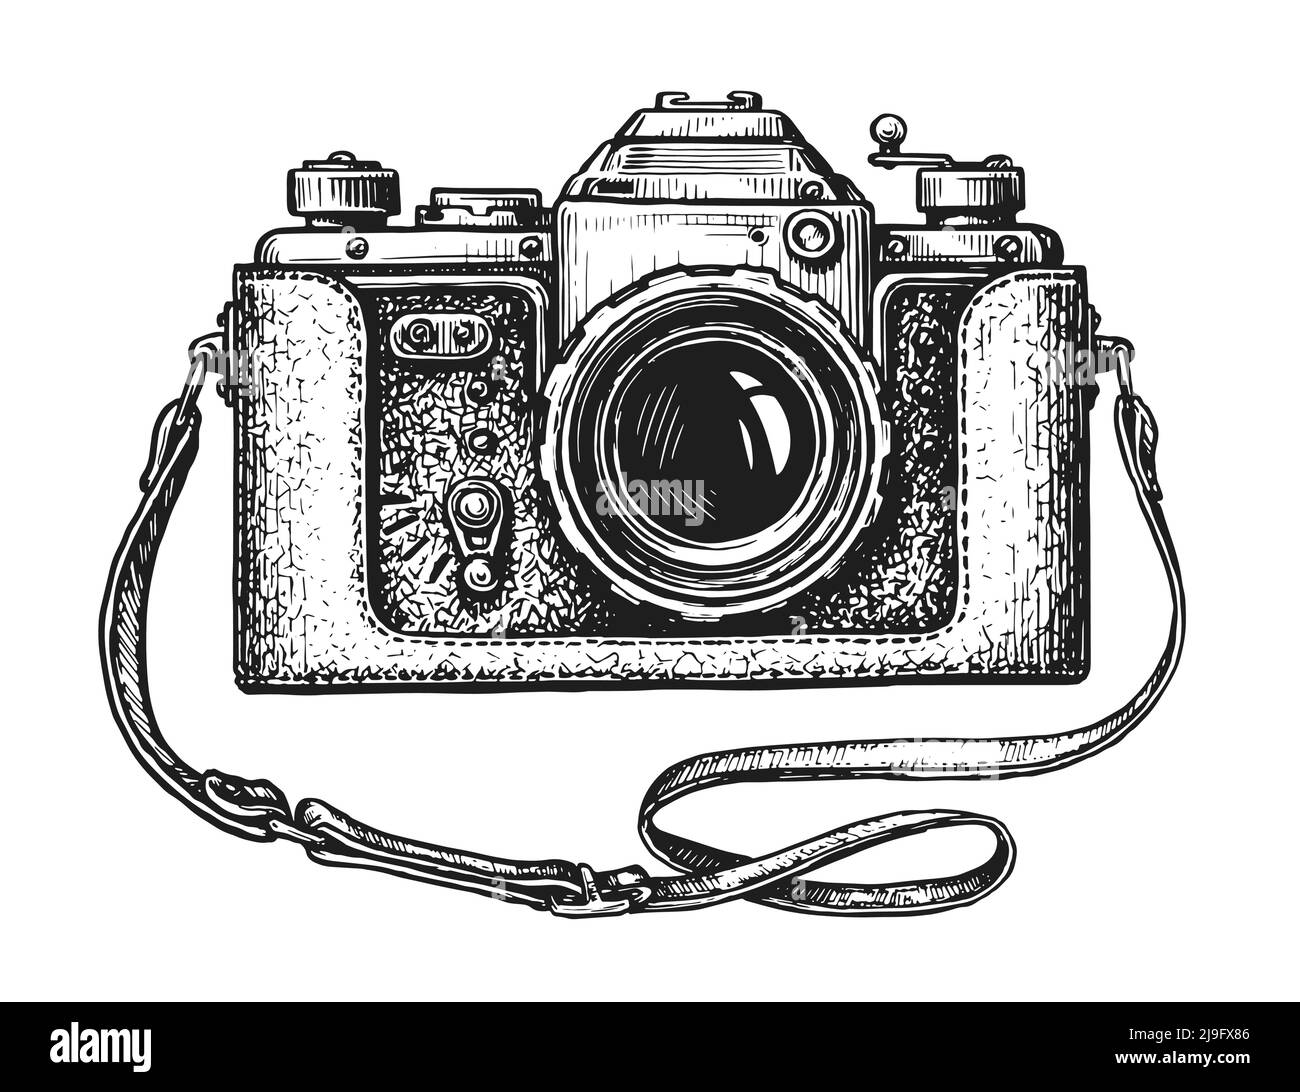 Analog Photo Camera Sketch Drawing Isolated Stock Illustration 205574404 |  Shutterstock